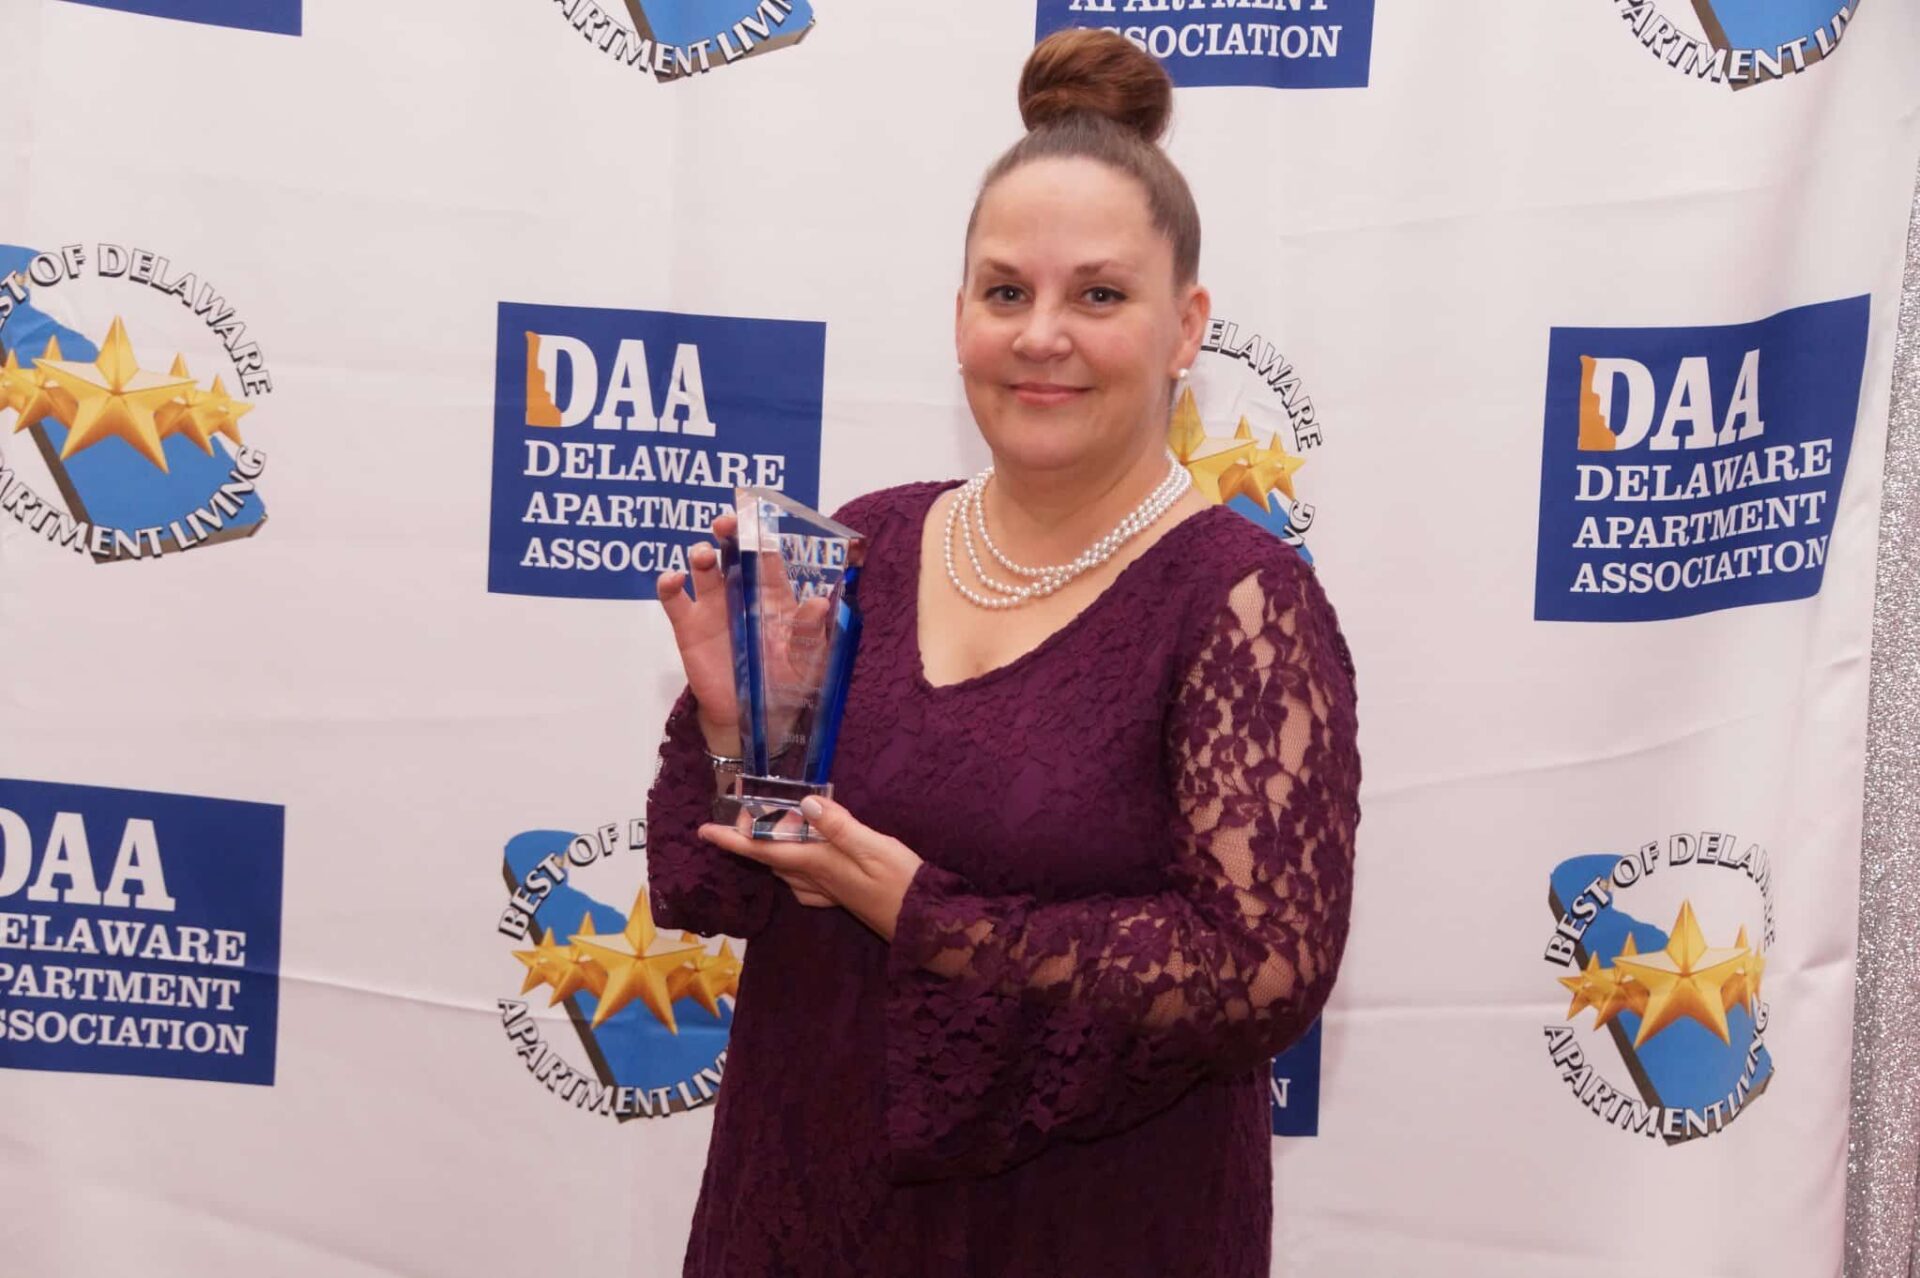 ResideBPG Receives Eight Awards at the Delaware Apartment Association’s Best of Delaware